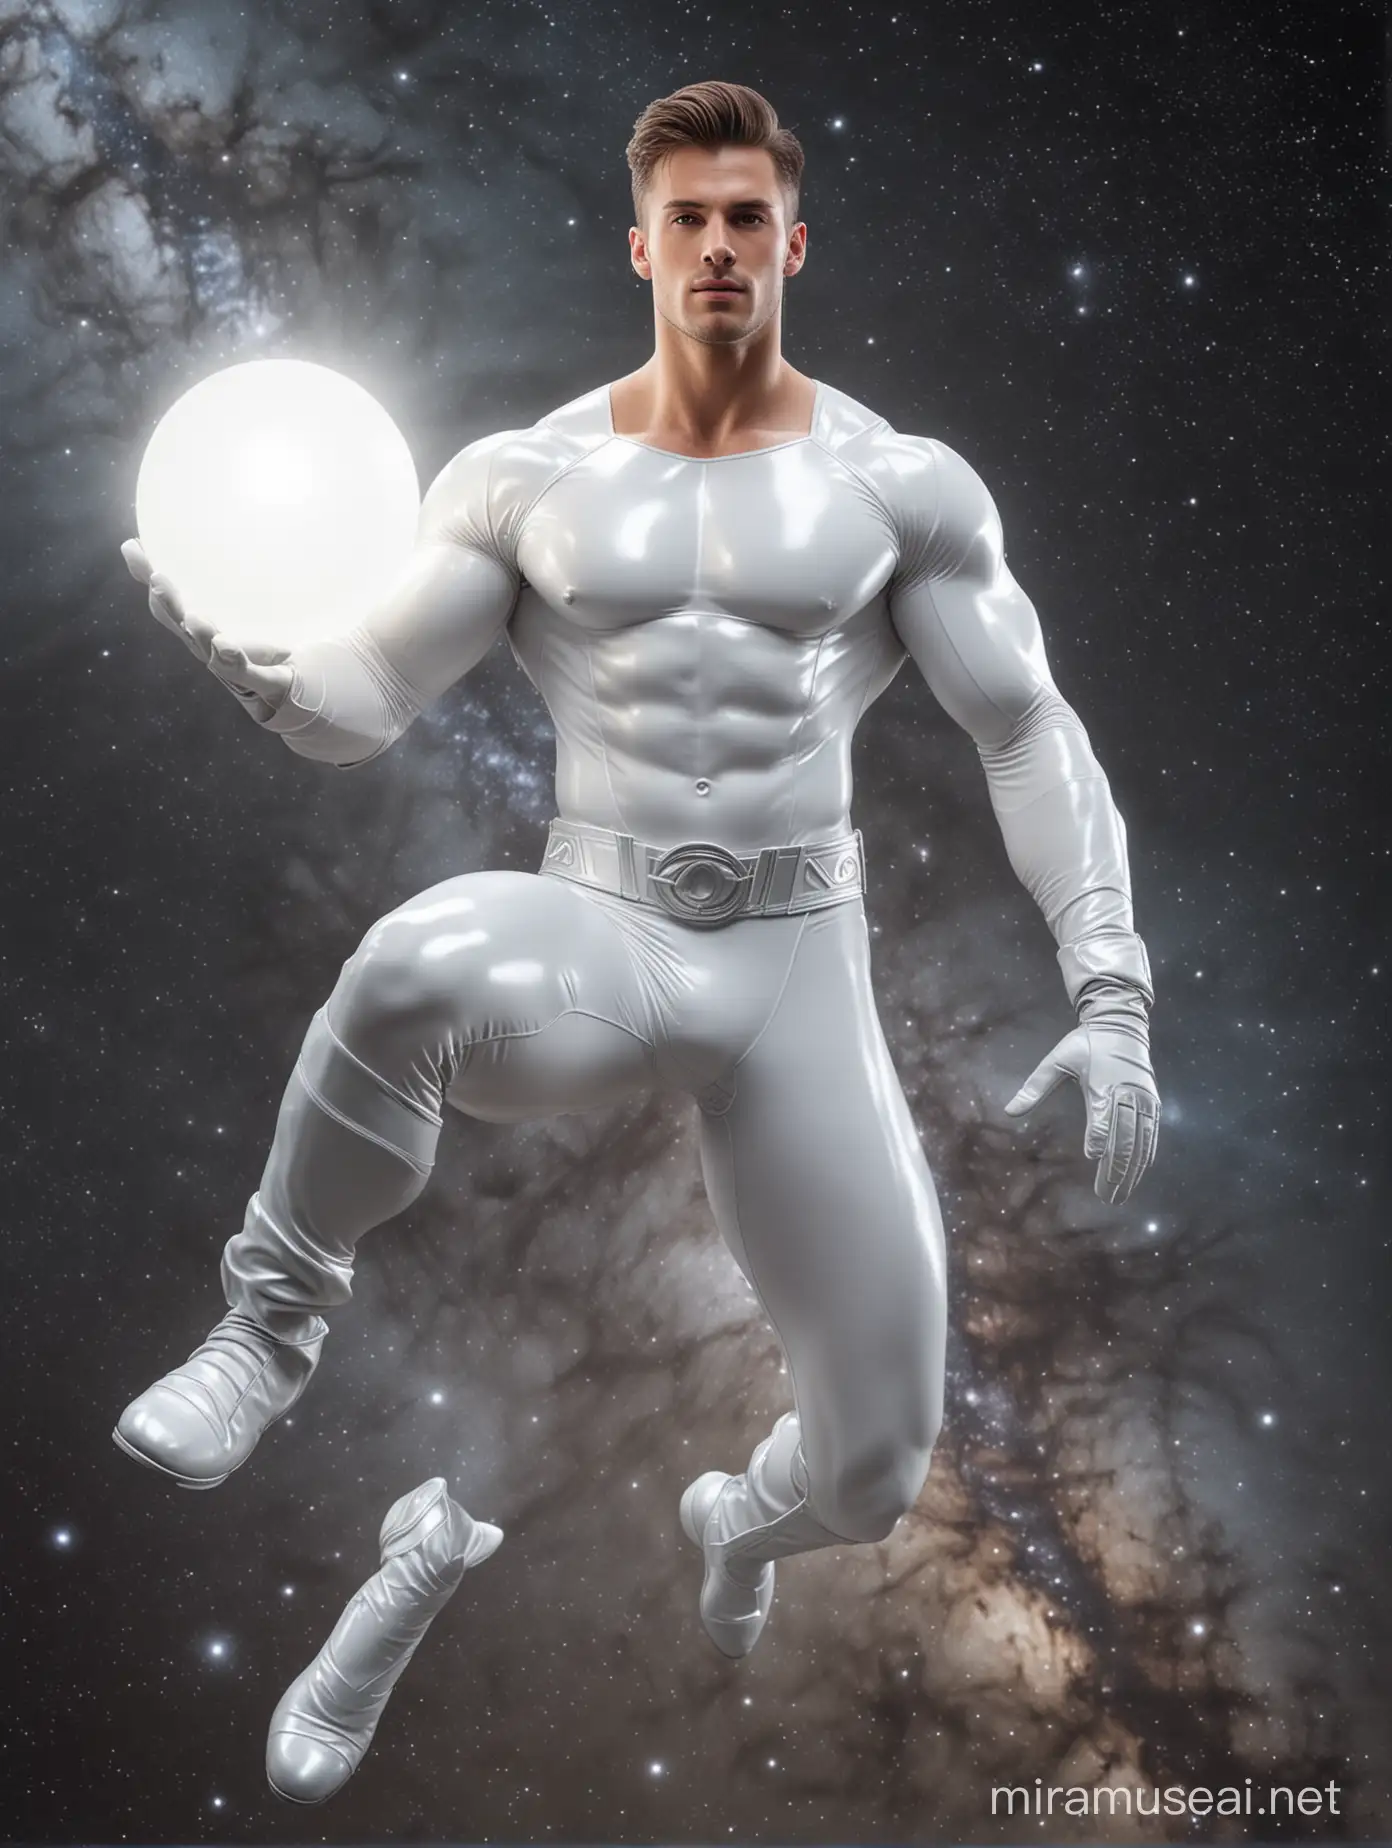 full Full body photorealistic ulra realism of picture of handsome hunky White Lantern wearing a white and silver latex spandex and gloves flying . Space and milky way as background